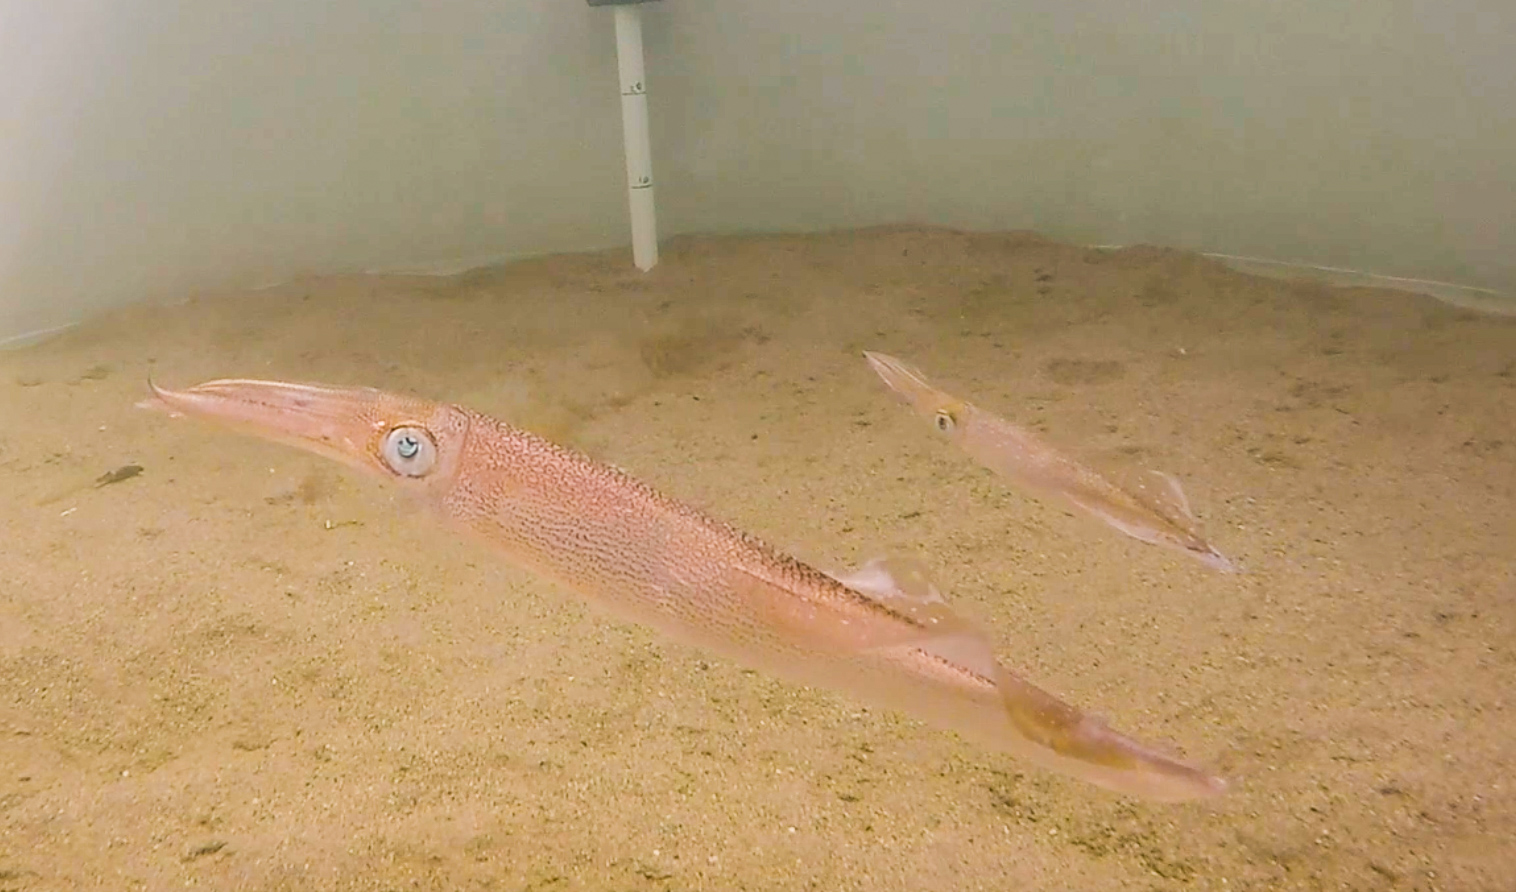 Mating squid don't stop for loud noises - GeoSpace - AGU Blogosphere